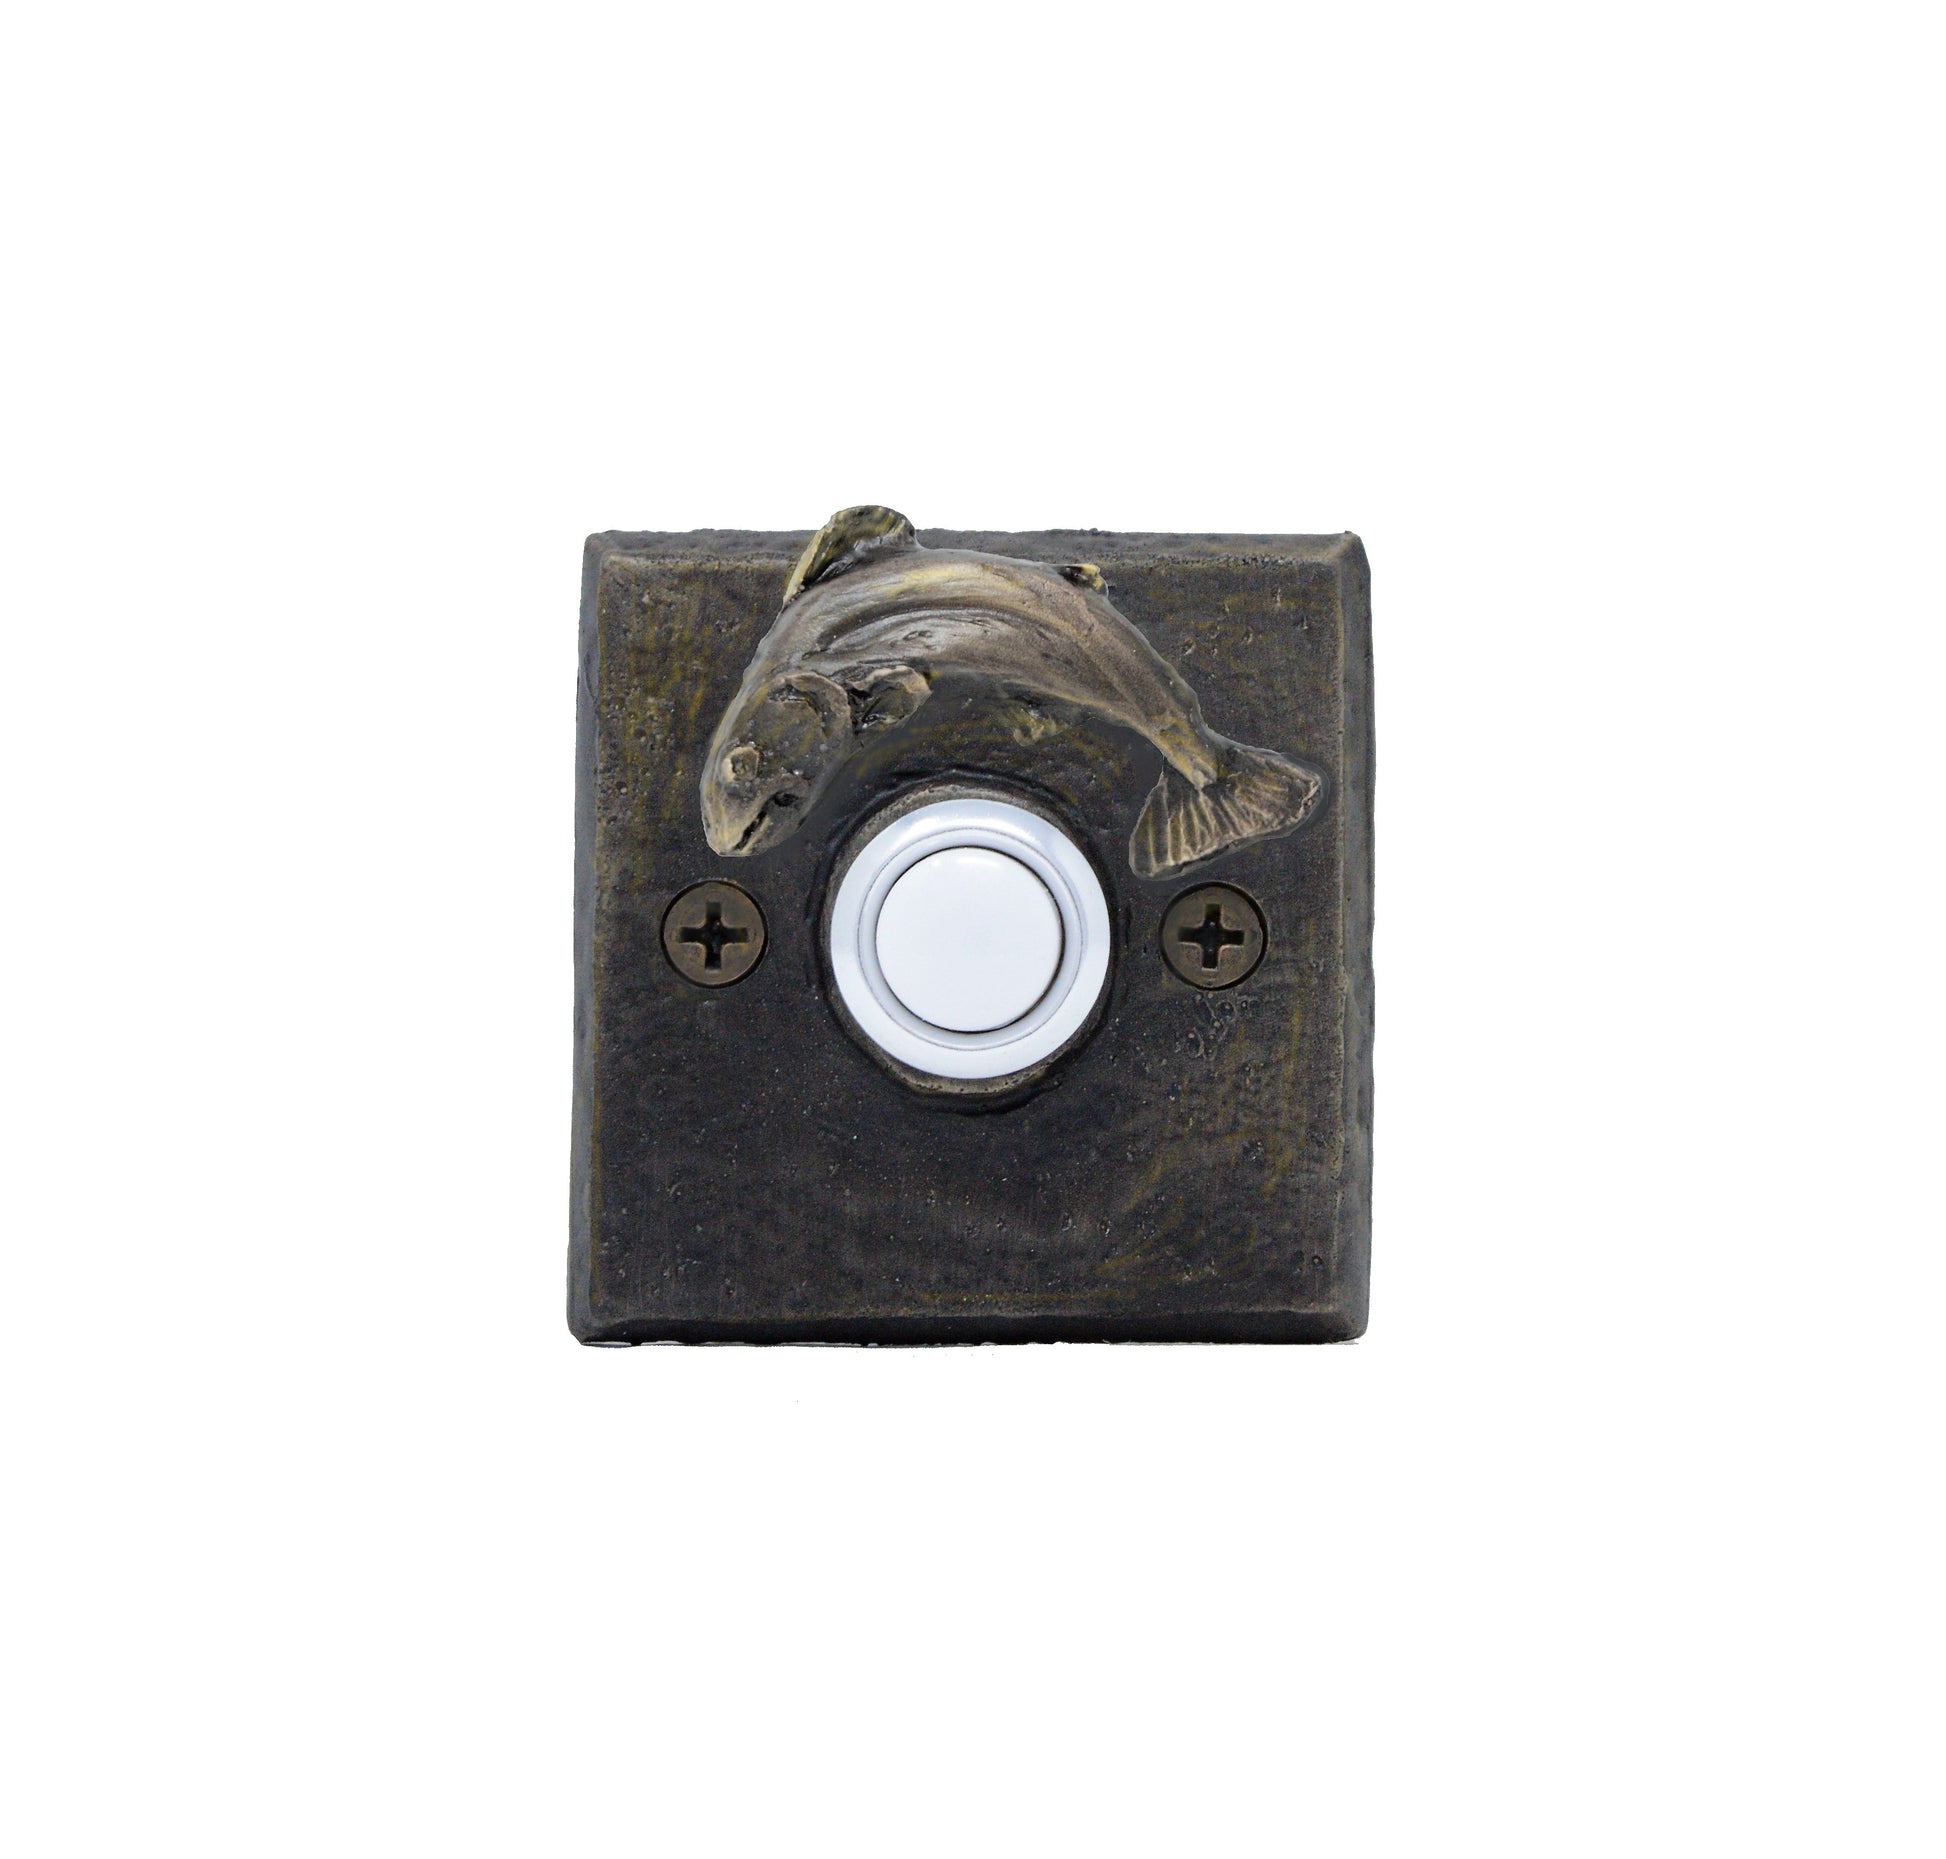 Square doorbell with trout - solid bronze